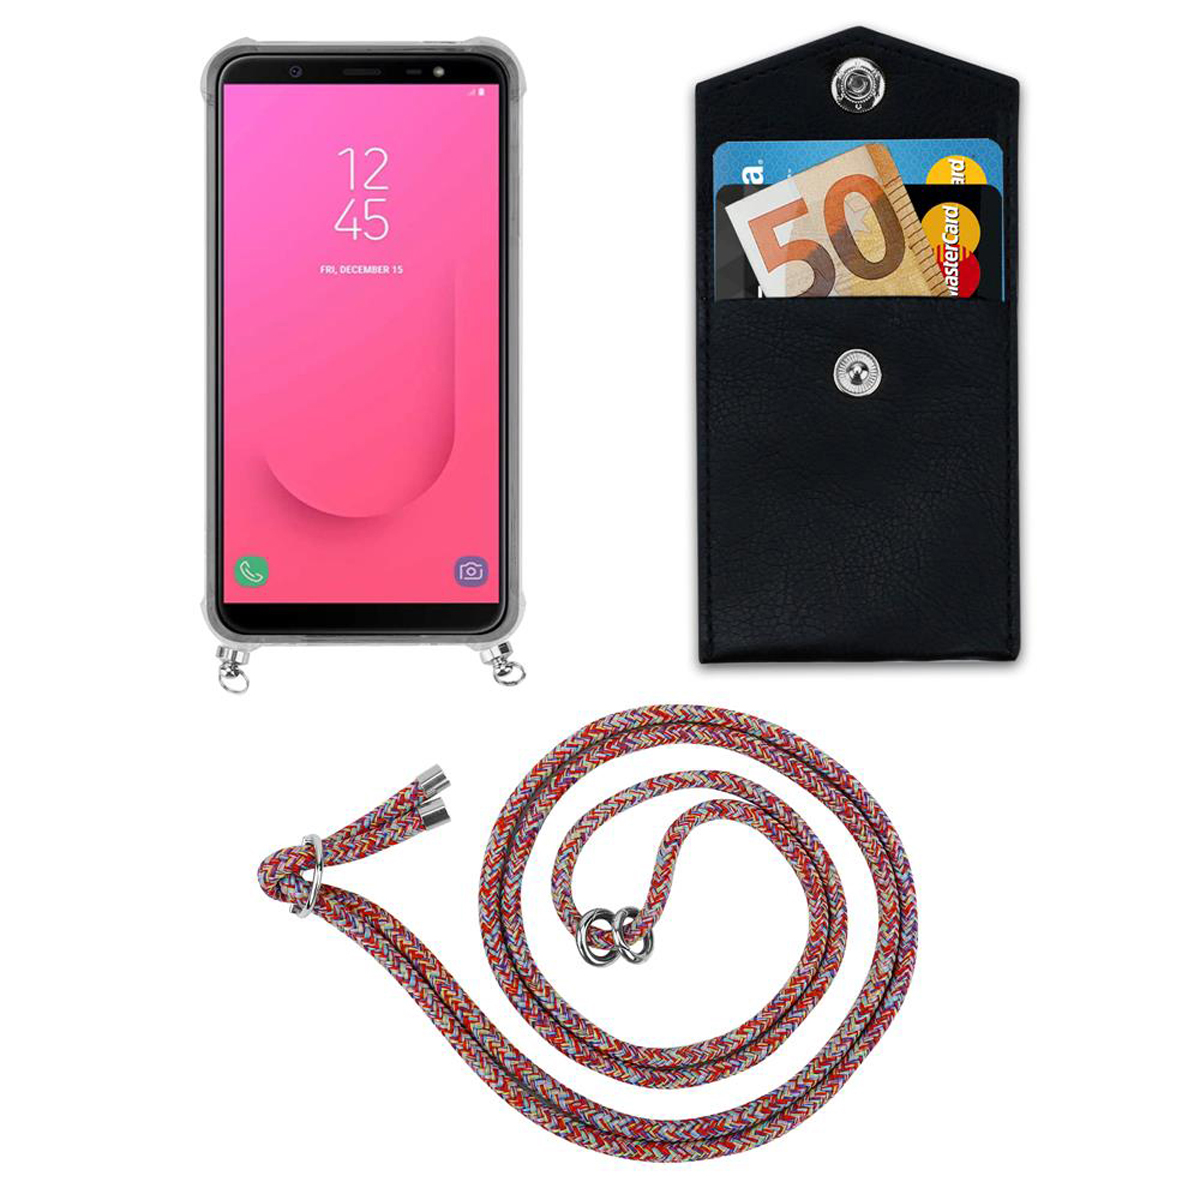 CADORABO Handy Kette Kordel mit A6 Ringen, Silber Galaxy Band 2018, und Samsung, Hülle, COLORFUL abnehmbarer PLUS Backcover, PARROT